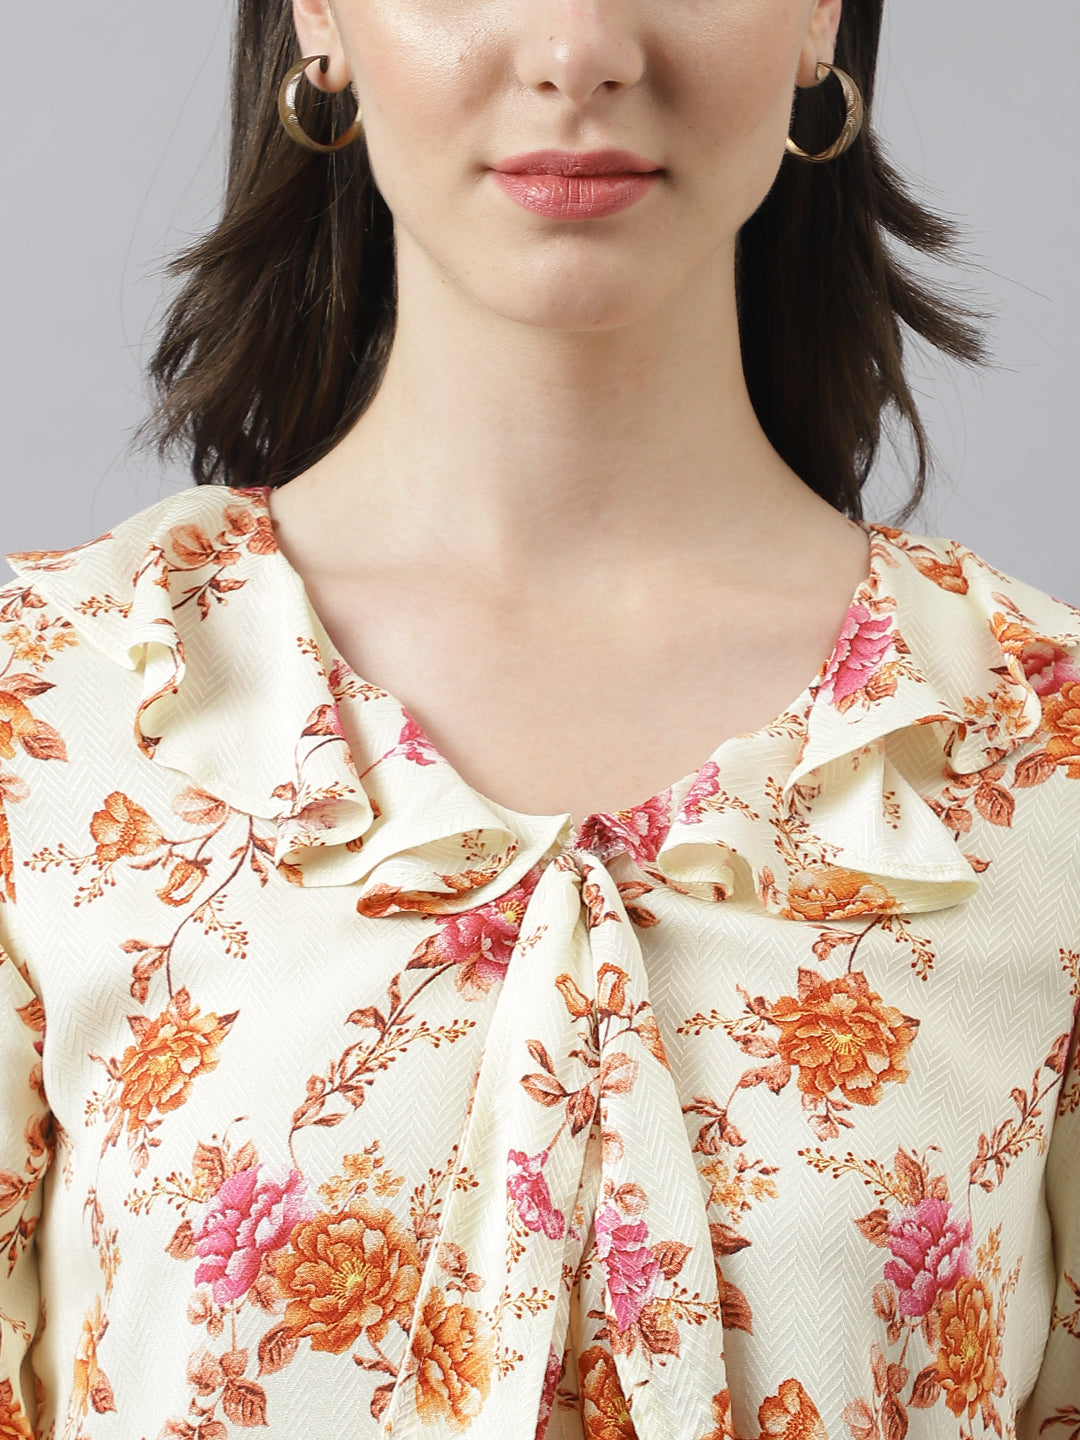 Flower Print Bell Sleeves Top With Front Knot